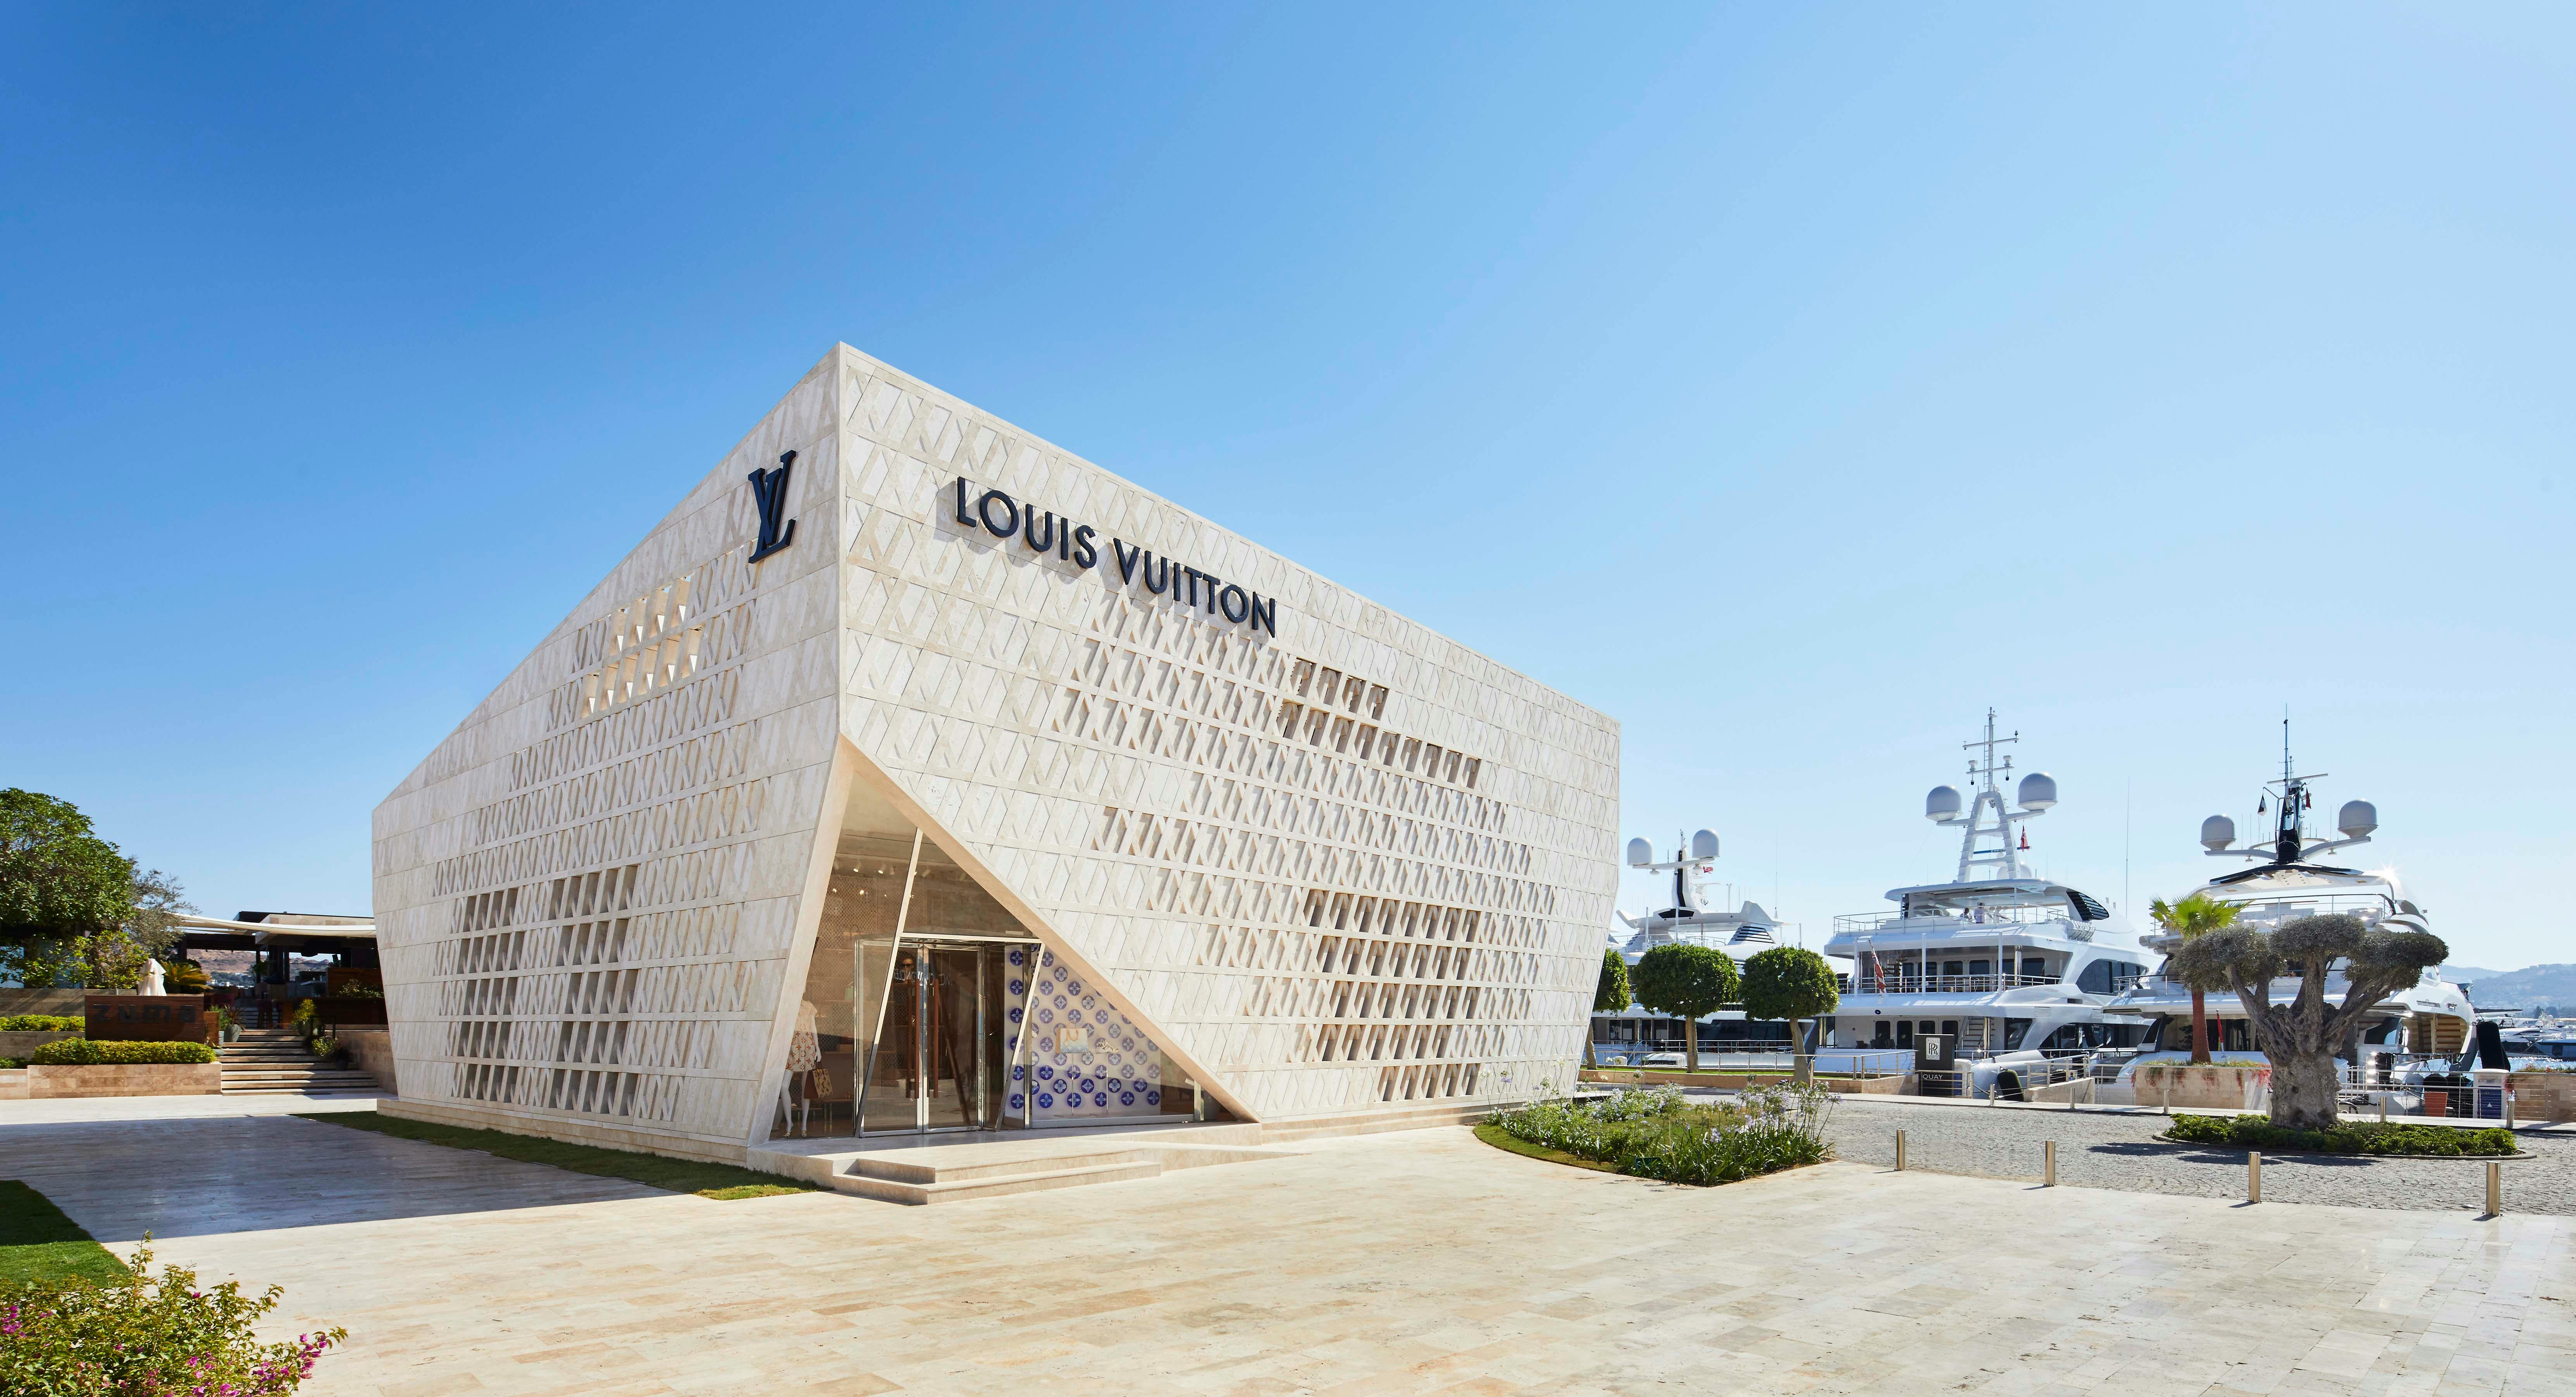 A giant in Bodrum: Louis Vuitton